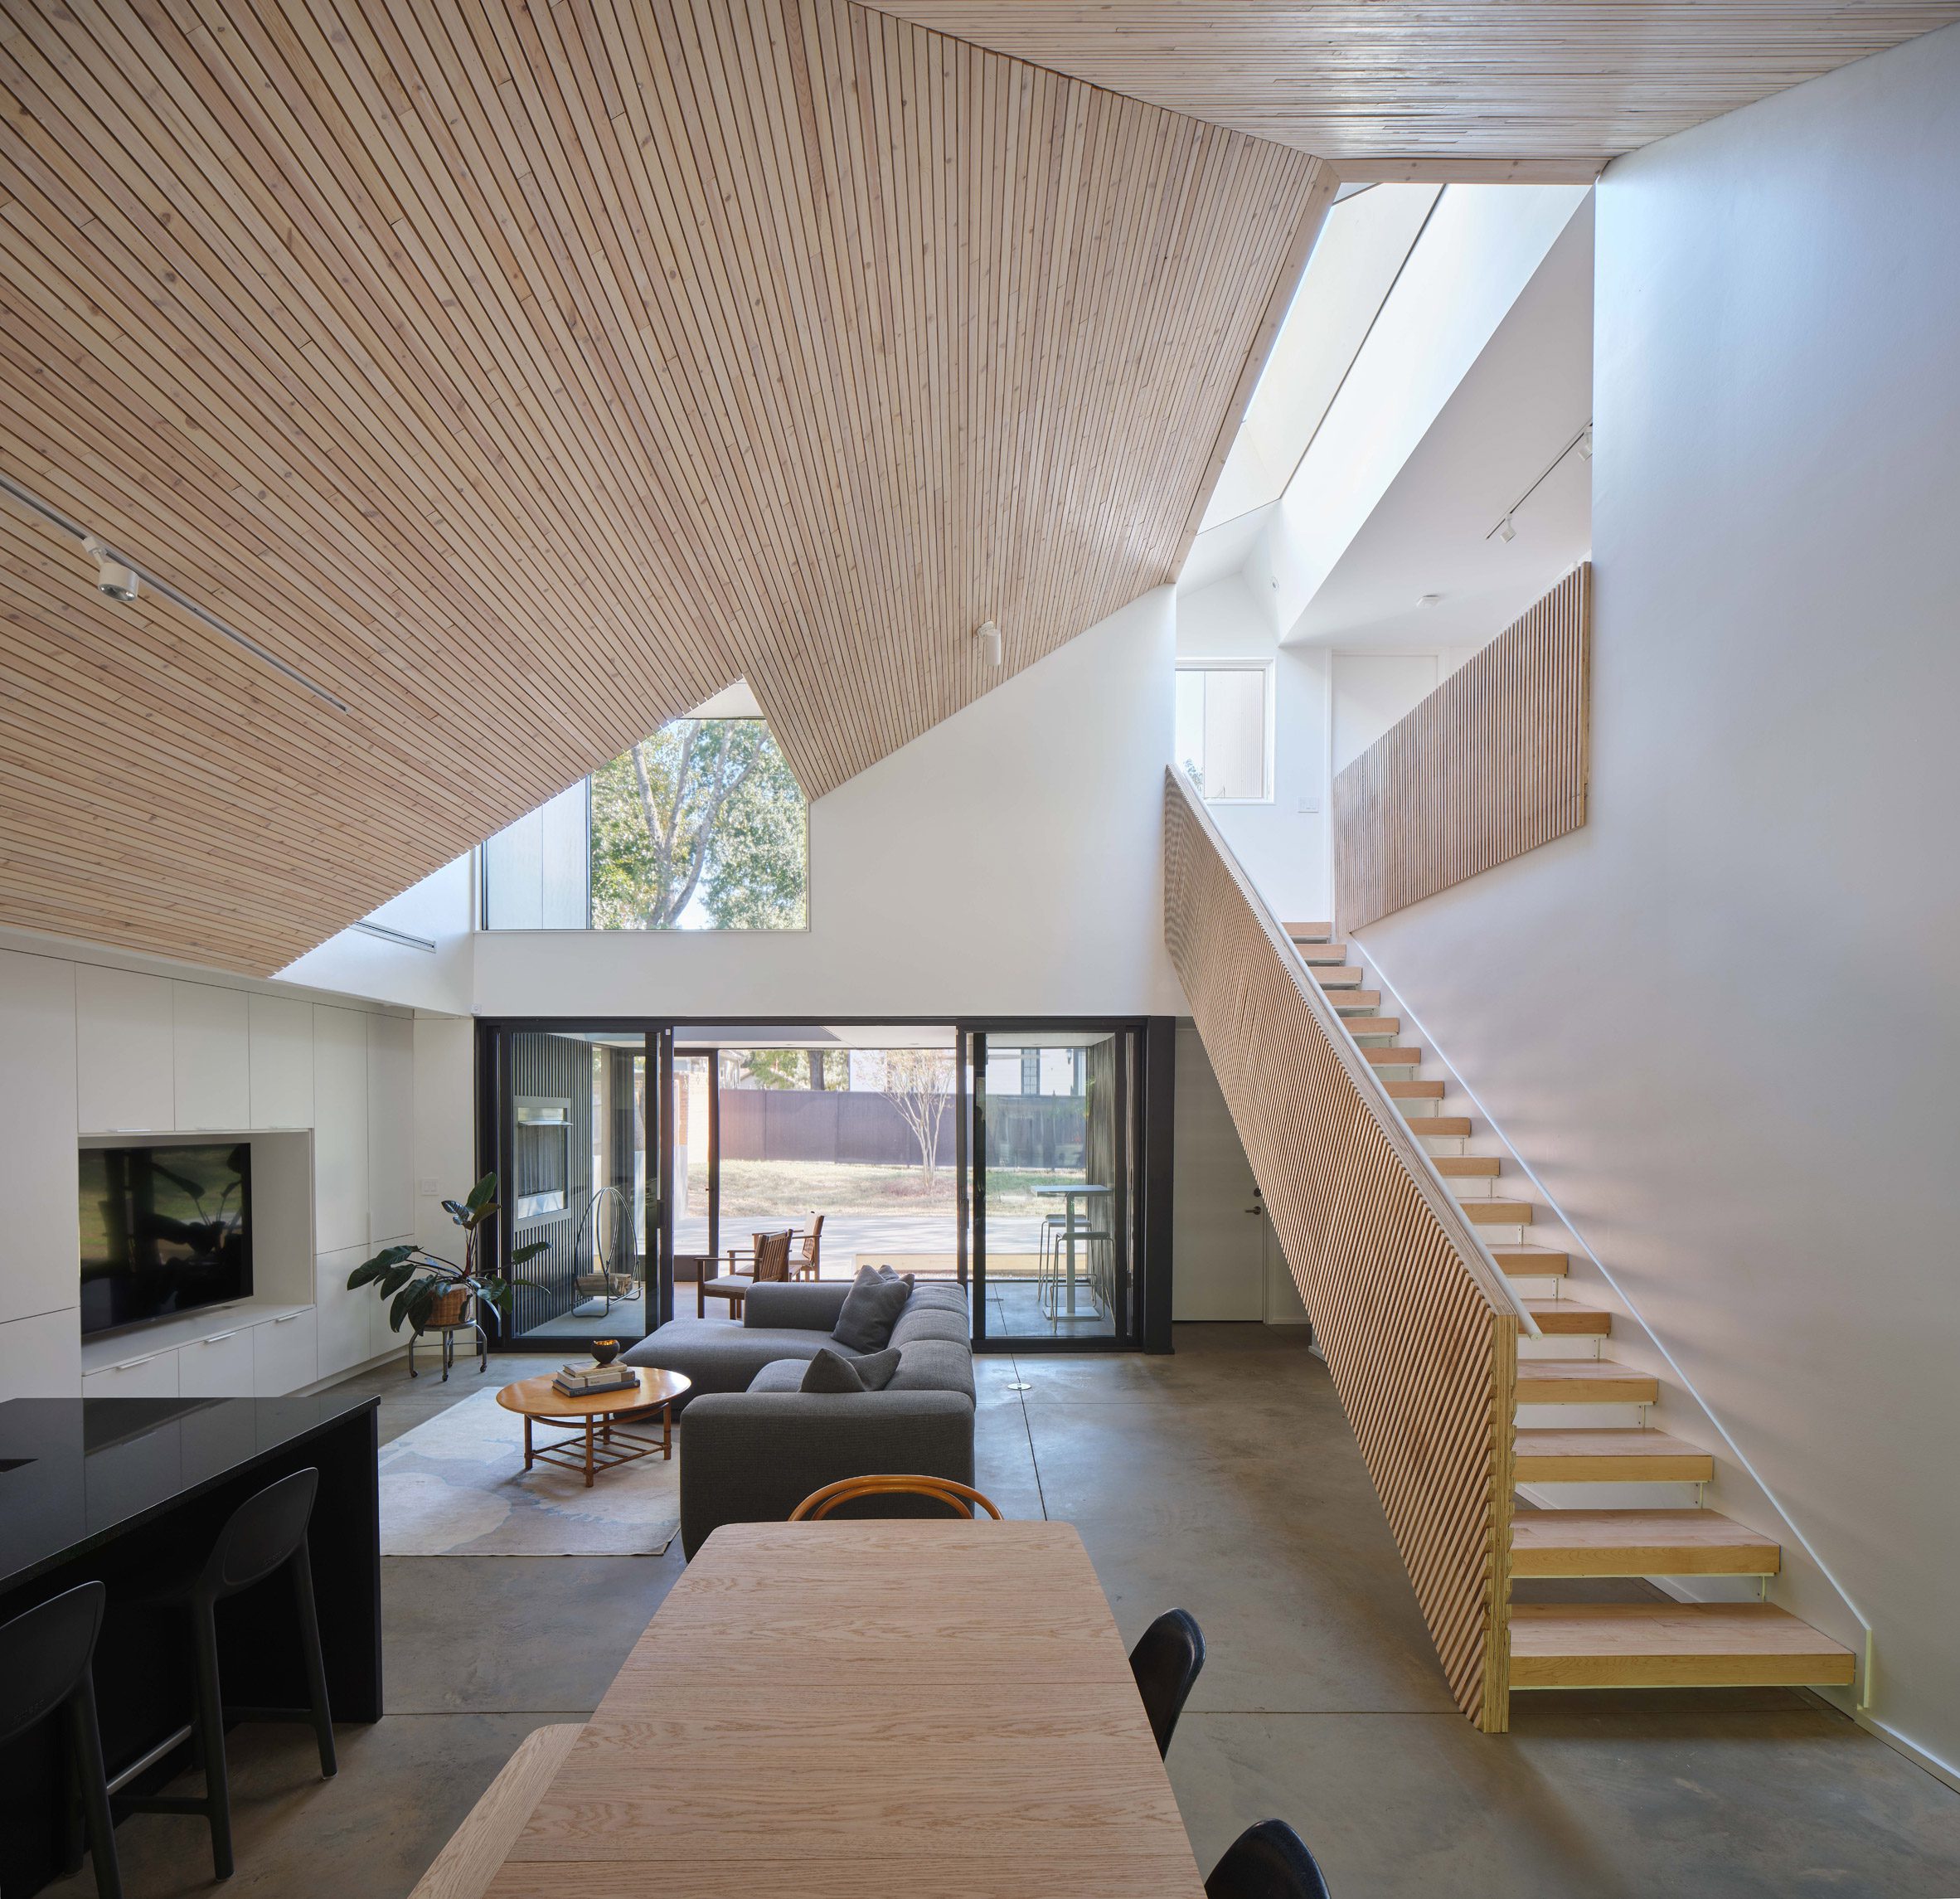 A living space with angled walls